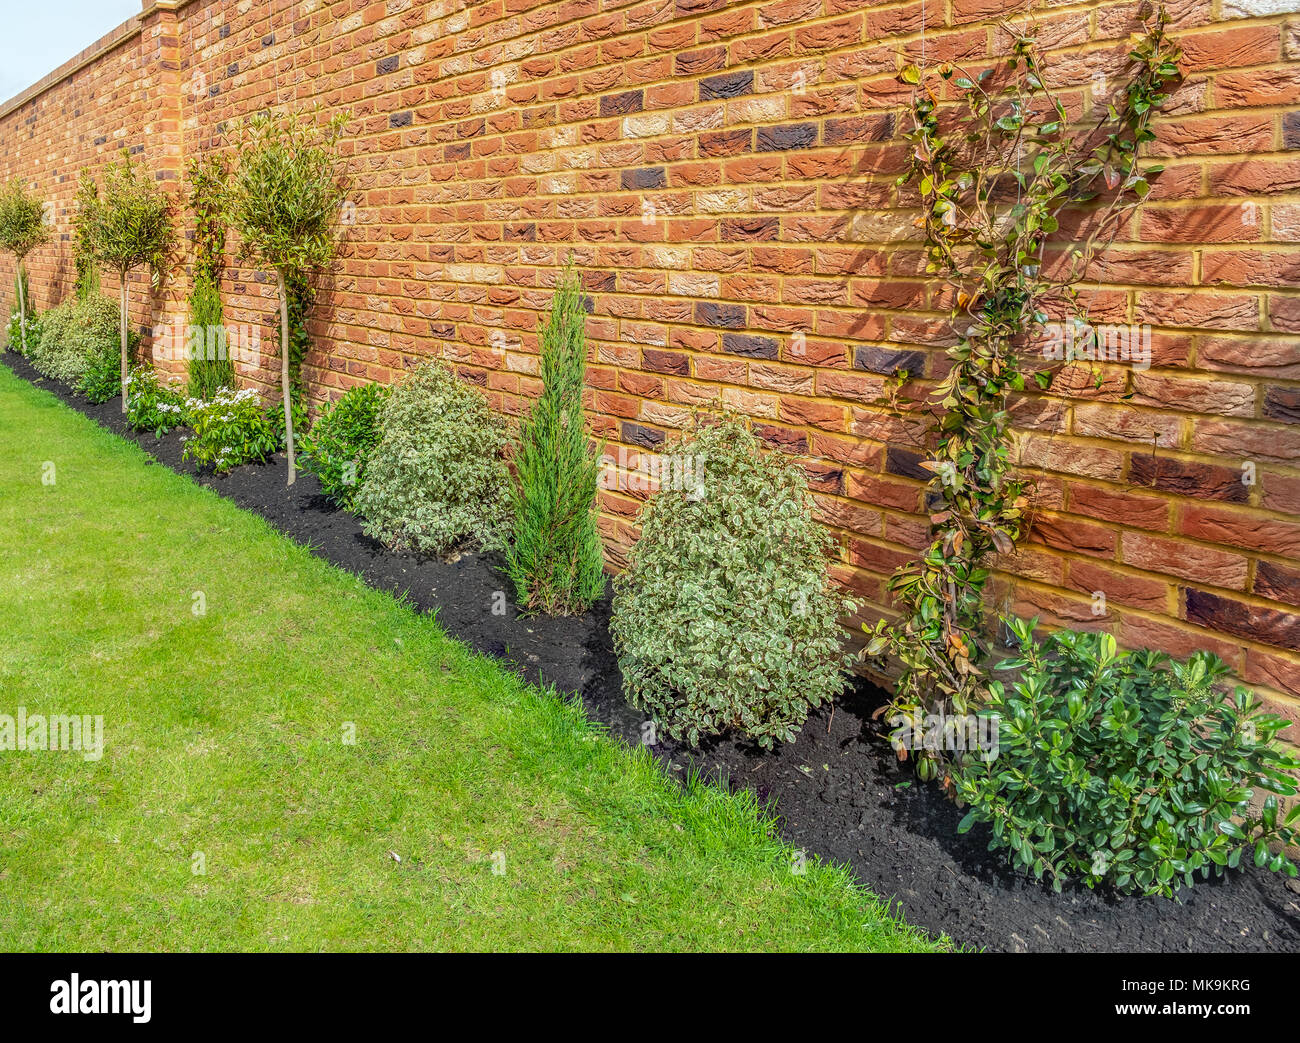 newly planted garden or back yard of hardy trees, shrubs and creepers along a bedding in front of an impressive red brick surrounding wall Stock Photo